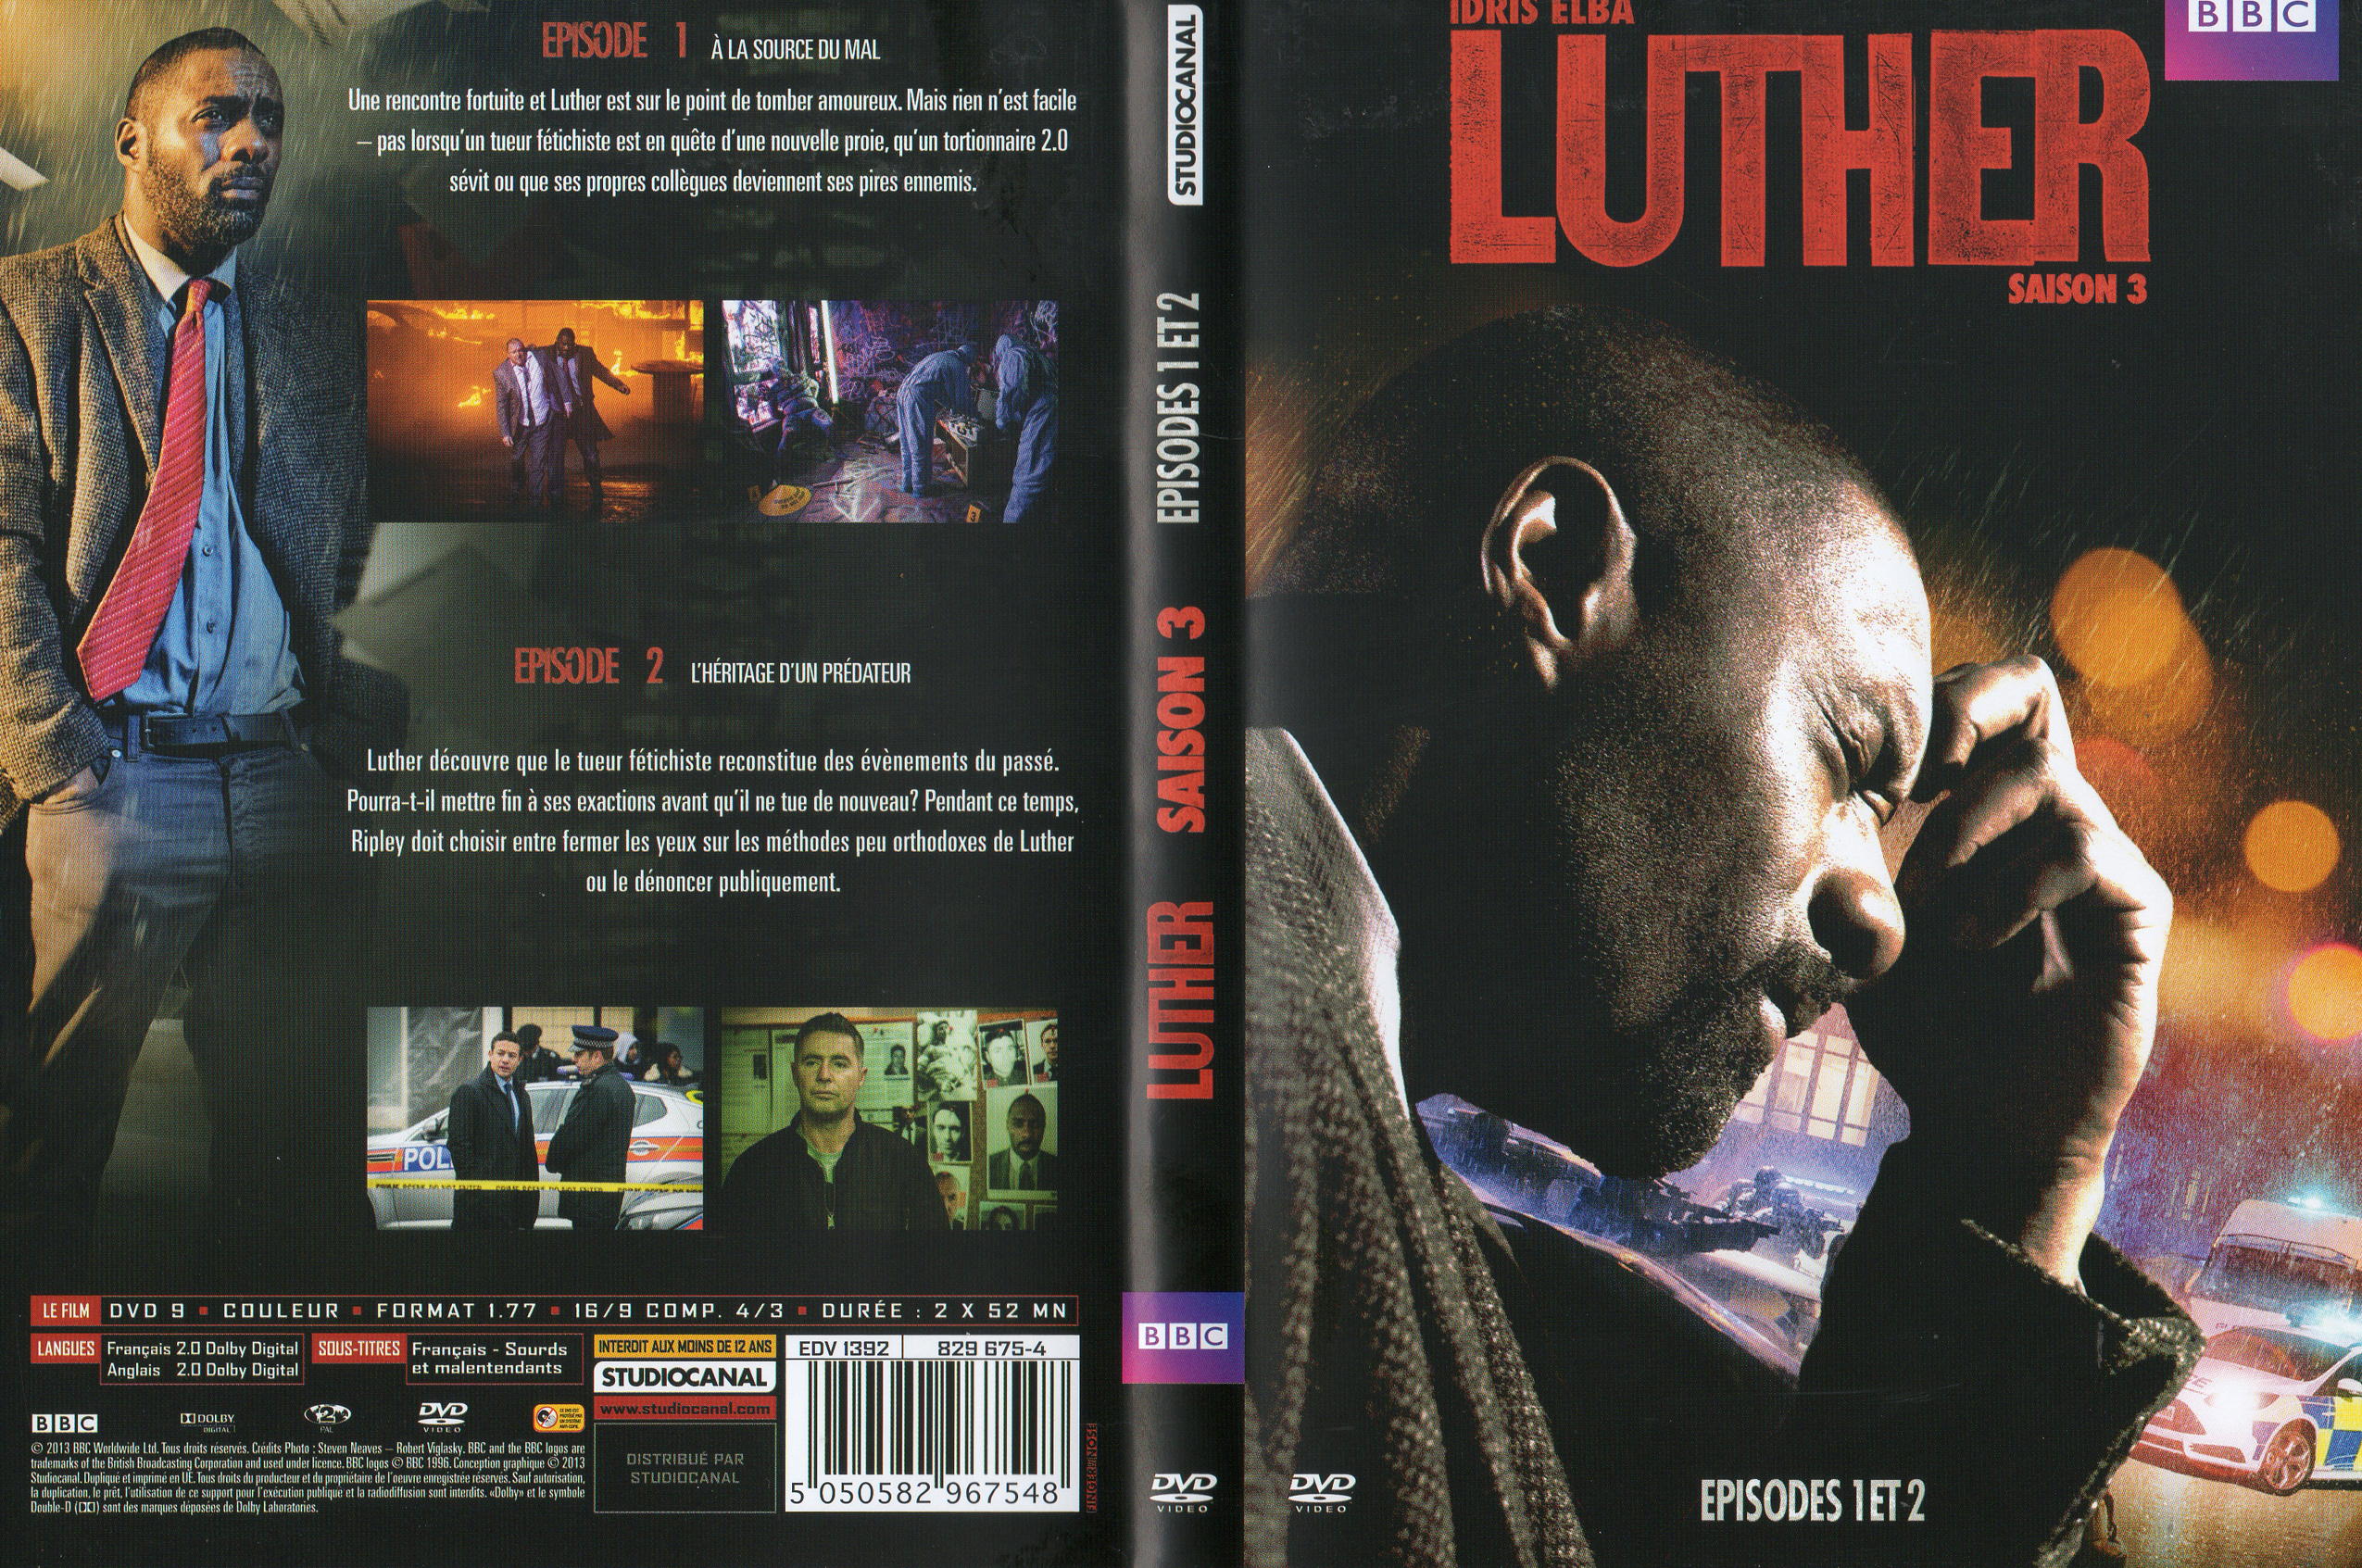 Jaquette DVD Luther Saison 3 Ep 1-2